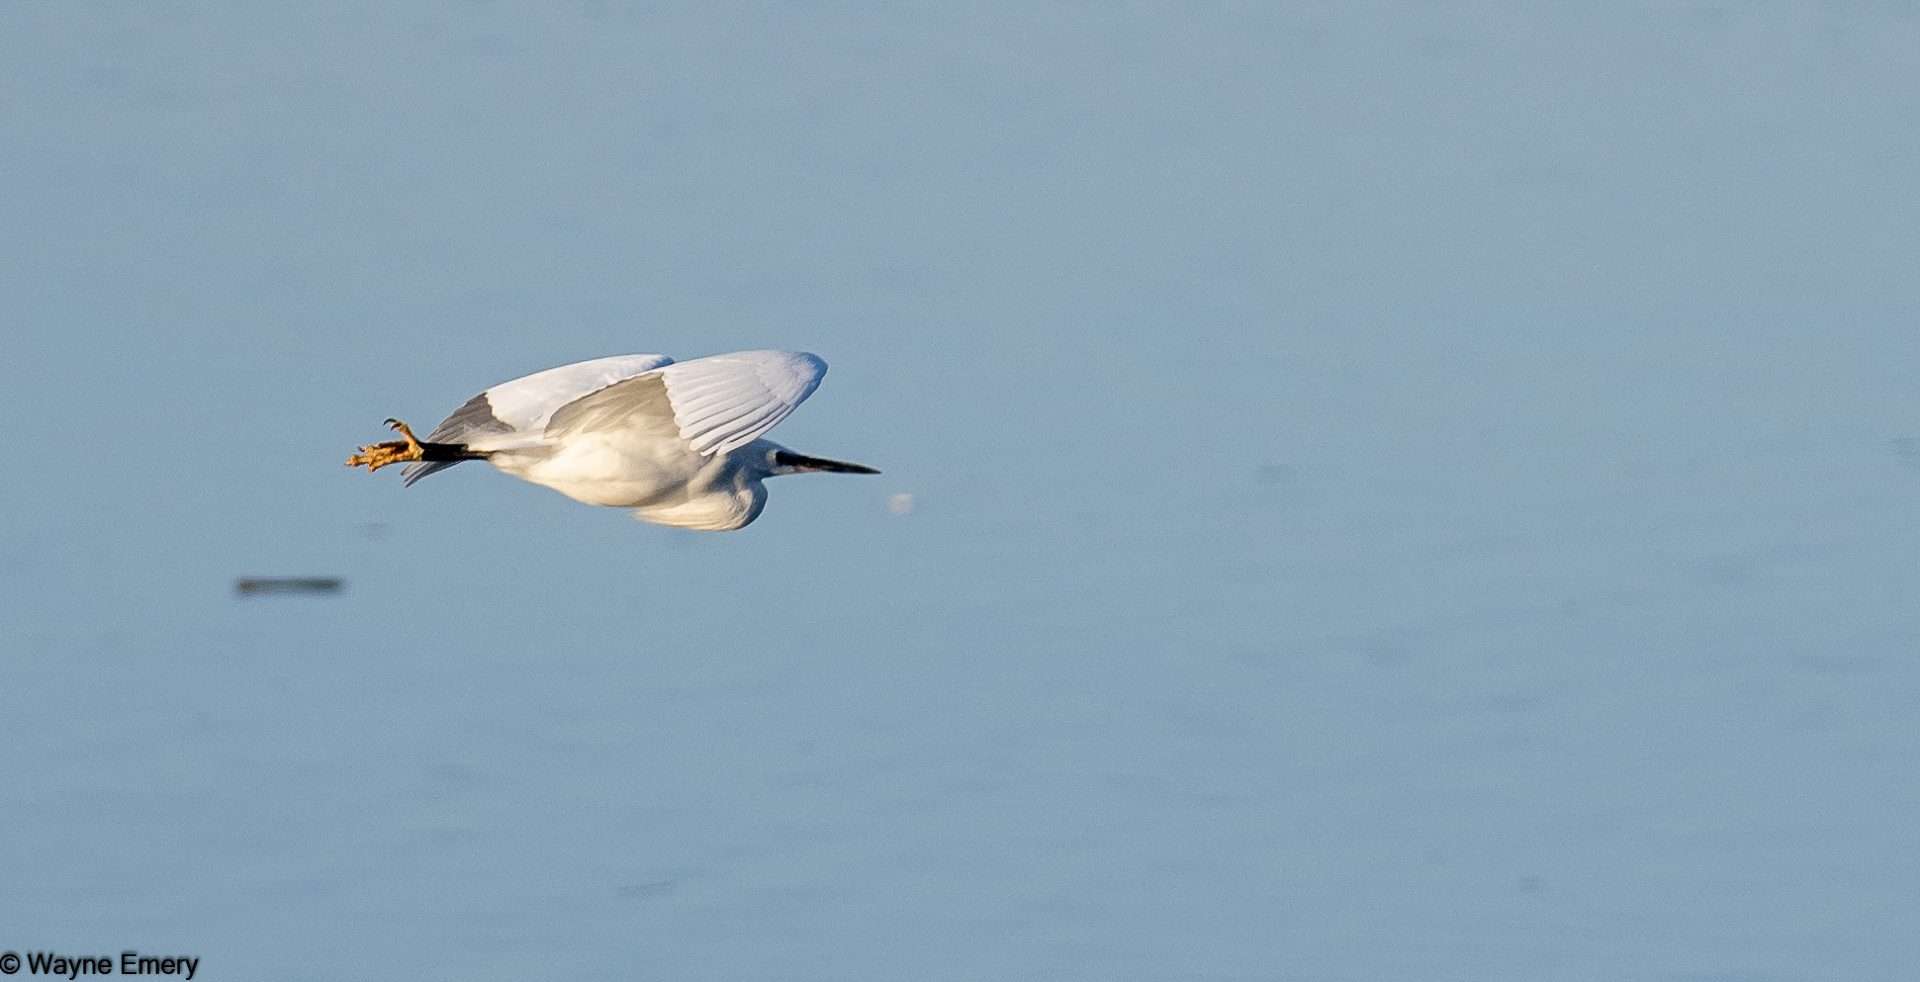 Little Egret by Wayne Emery at River Plym